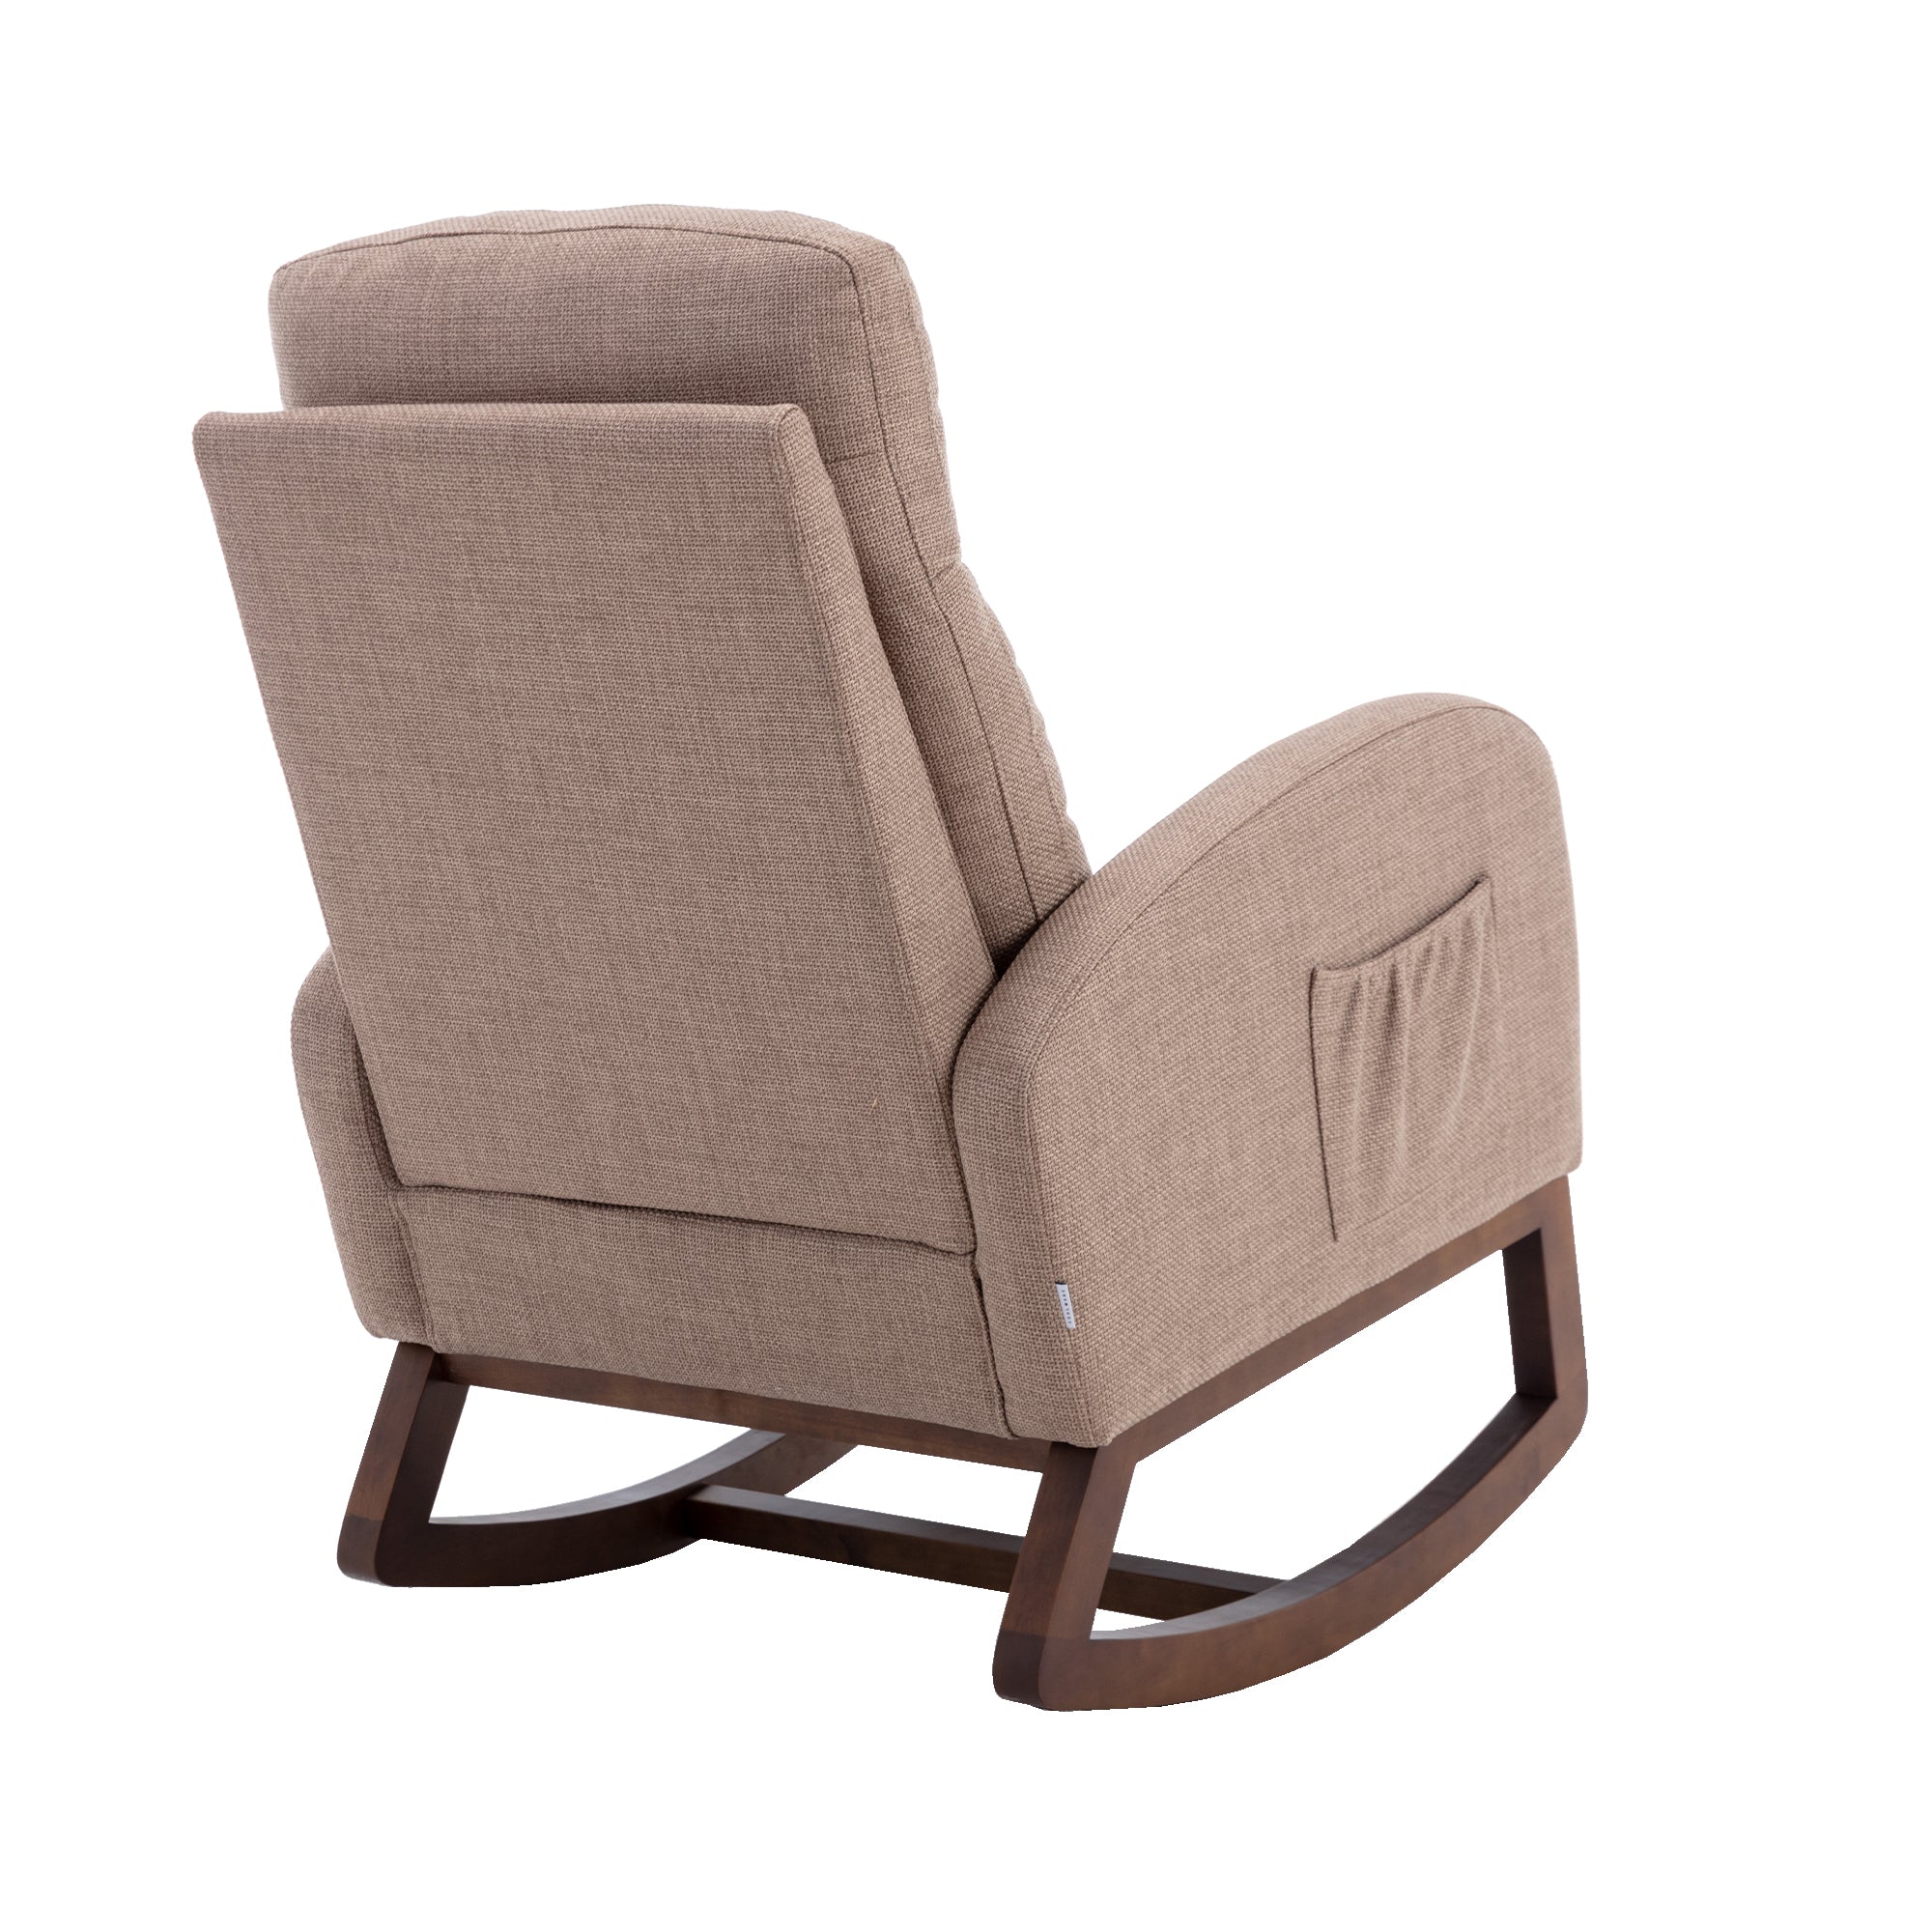 ZNTS Living room Comfortable rocking chair living room chair W153984215